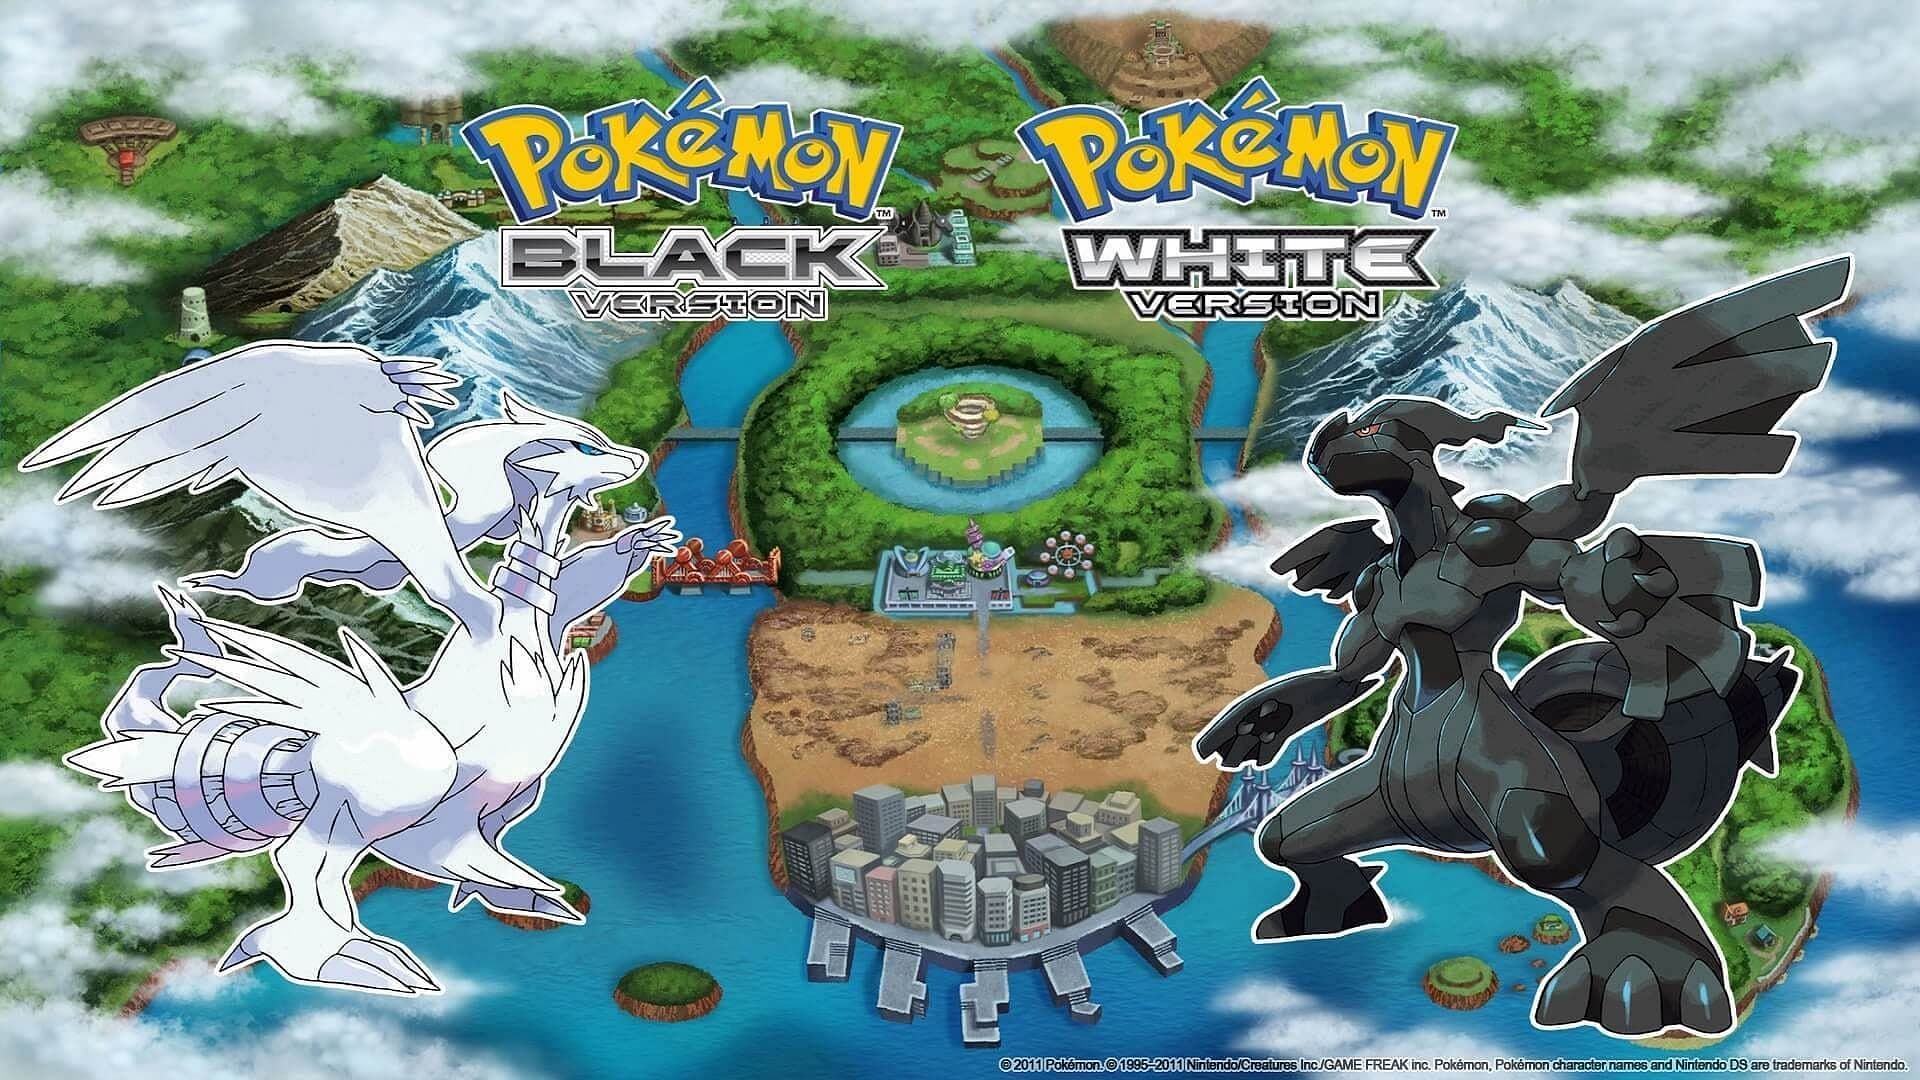 10 Titles Game Freak Made That Are Not Pokémon